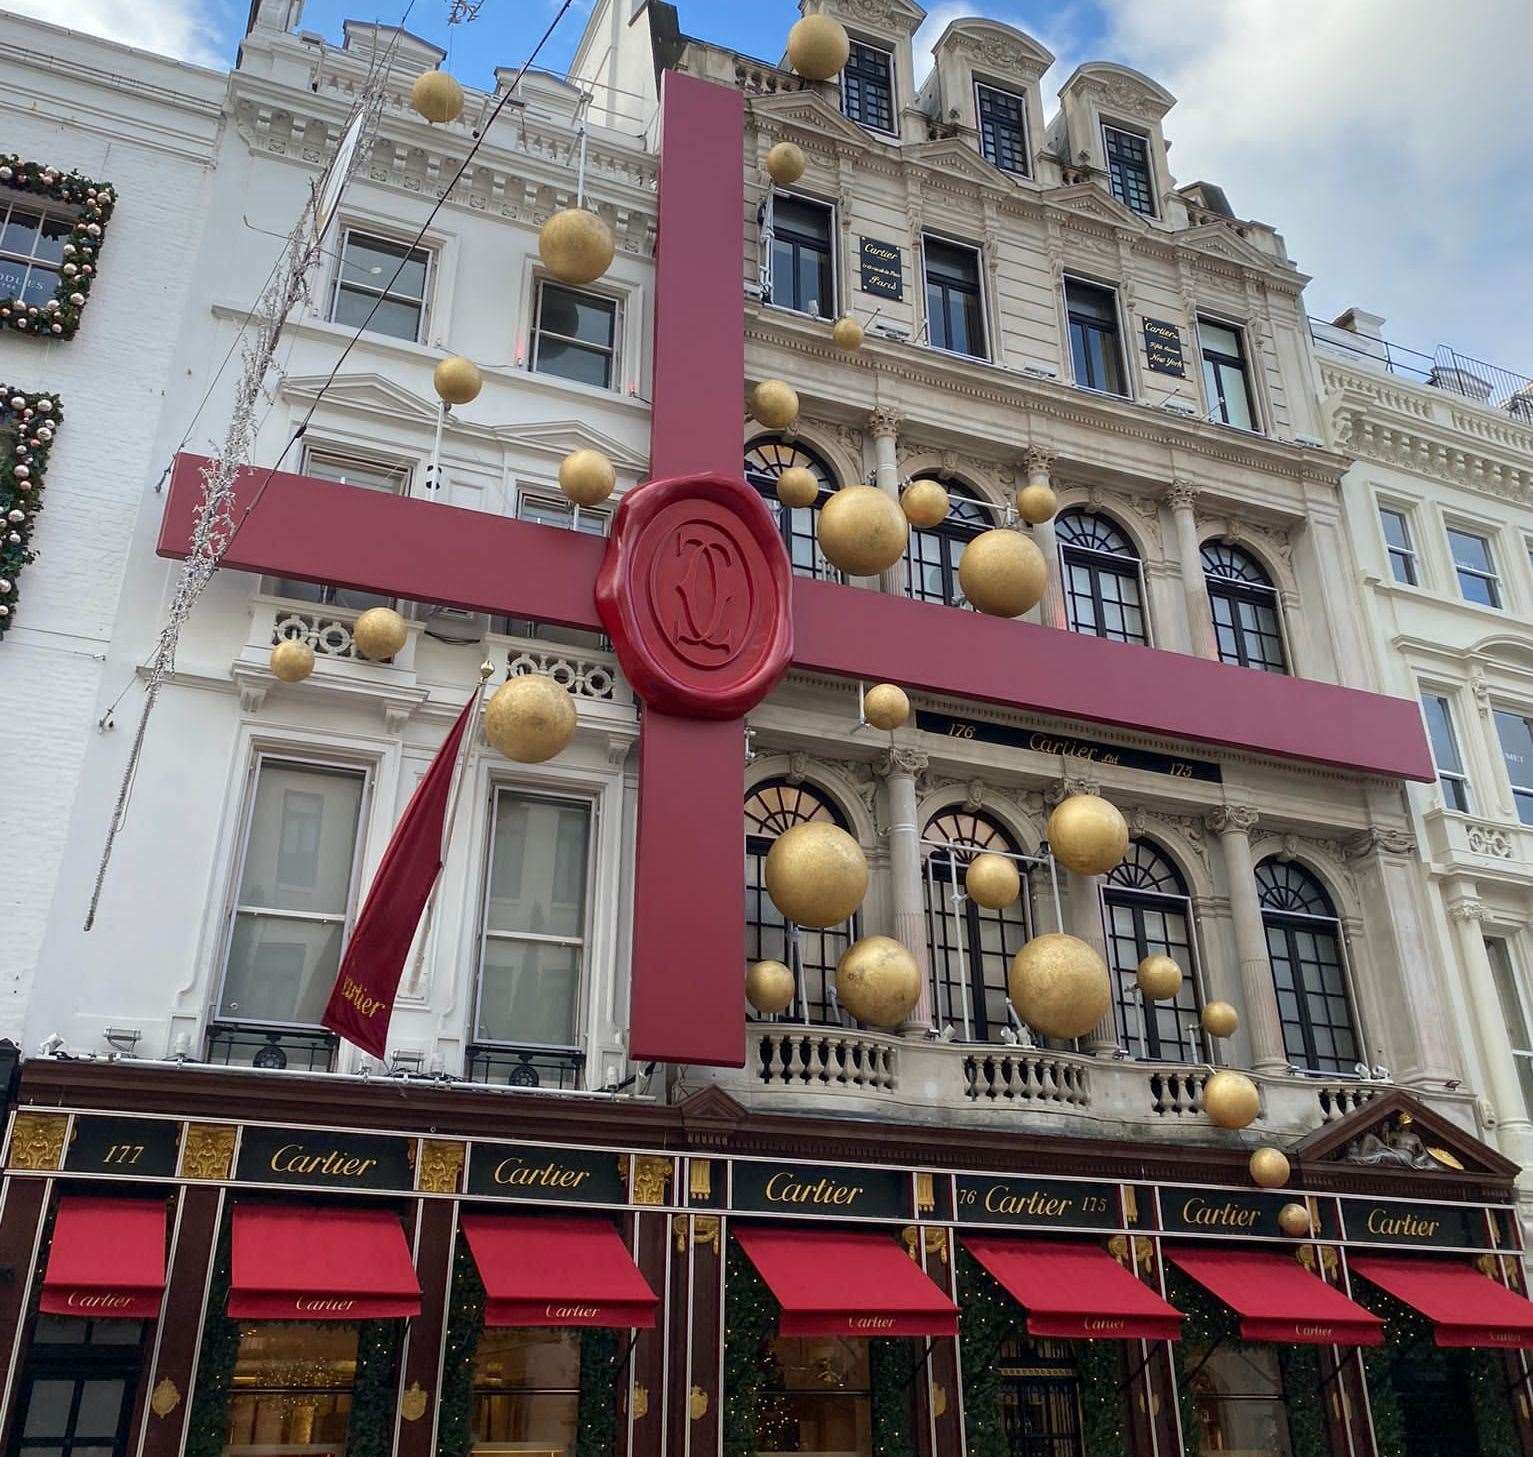 Cartier in New Bond Street was wrapped up like a giant Christmas present